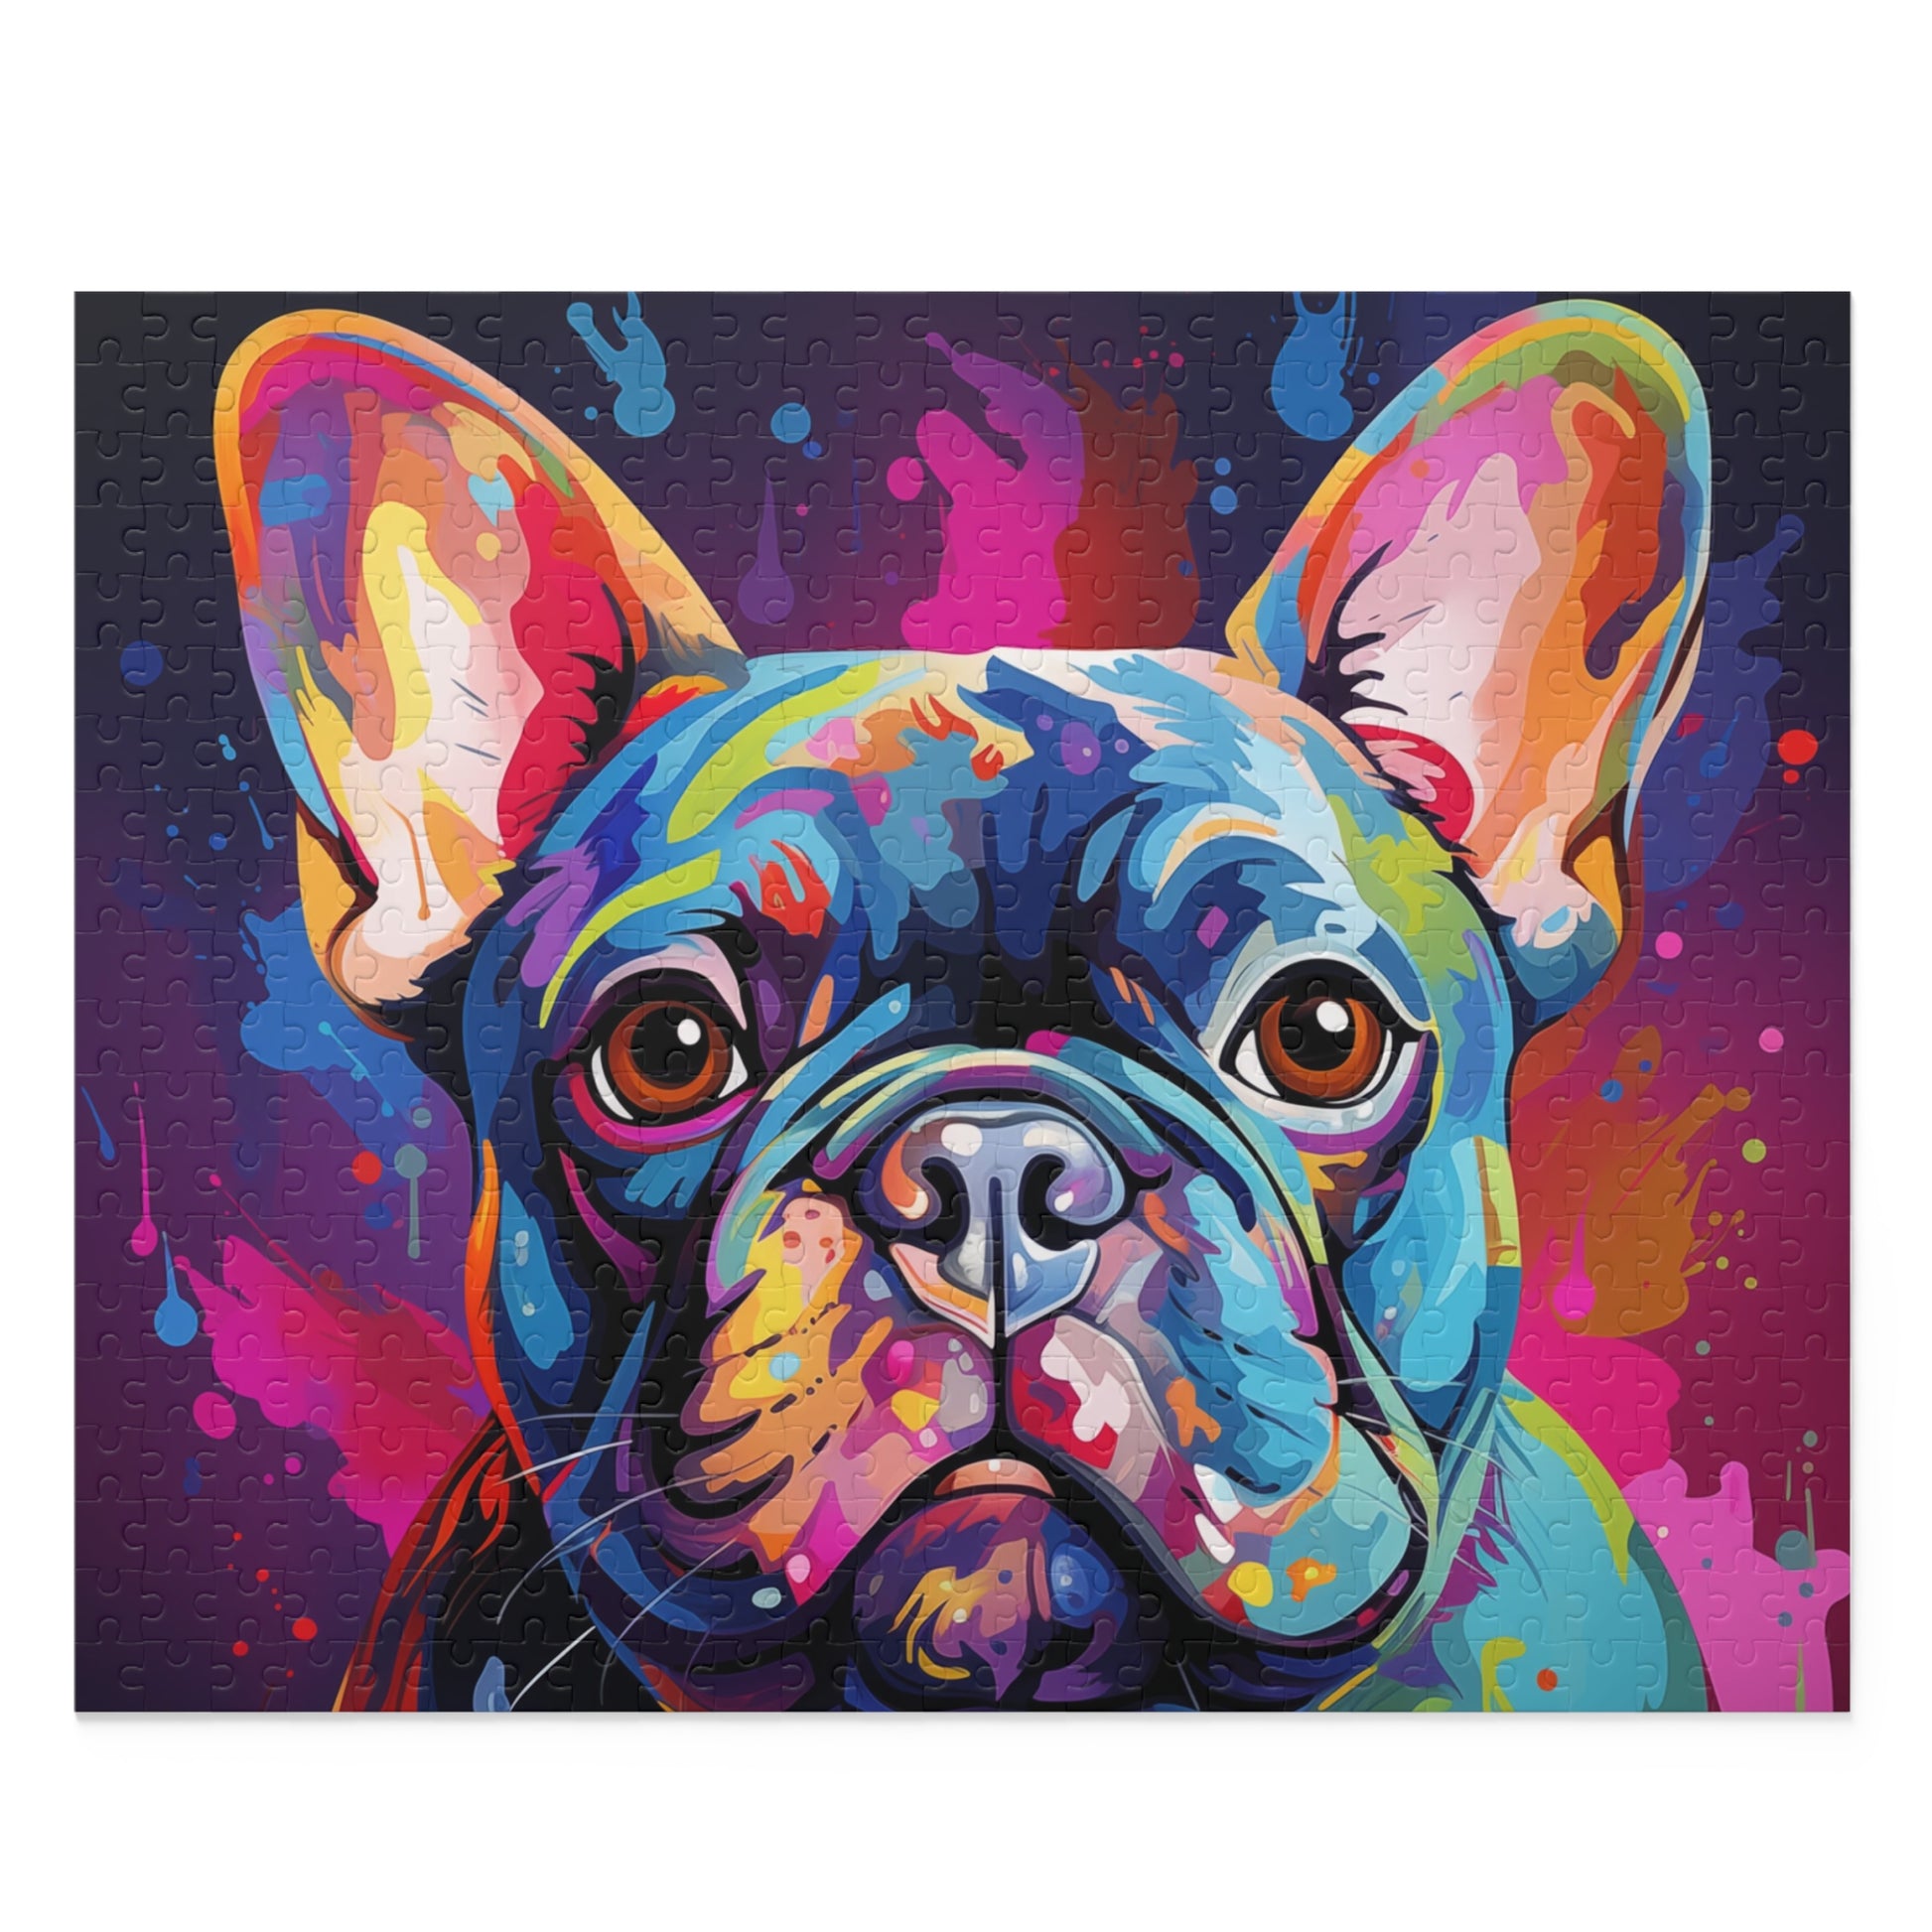 Oil Paint Watercolor Abstract Frenchie Dog Jigsaw Puzzle Adult Birthday Business Jigsaw Puzzle Gift for Him Funny Humorous Indoor Outdoor Game Gift For Her Online-1